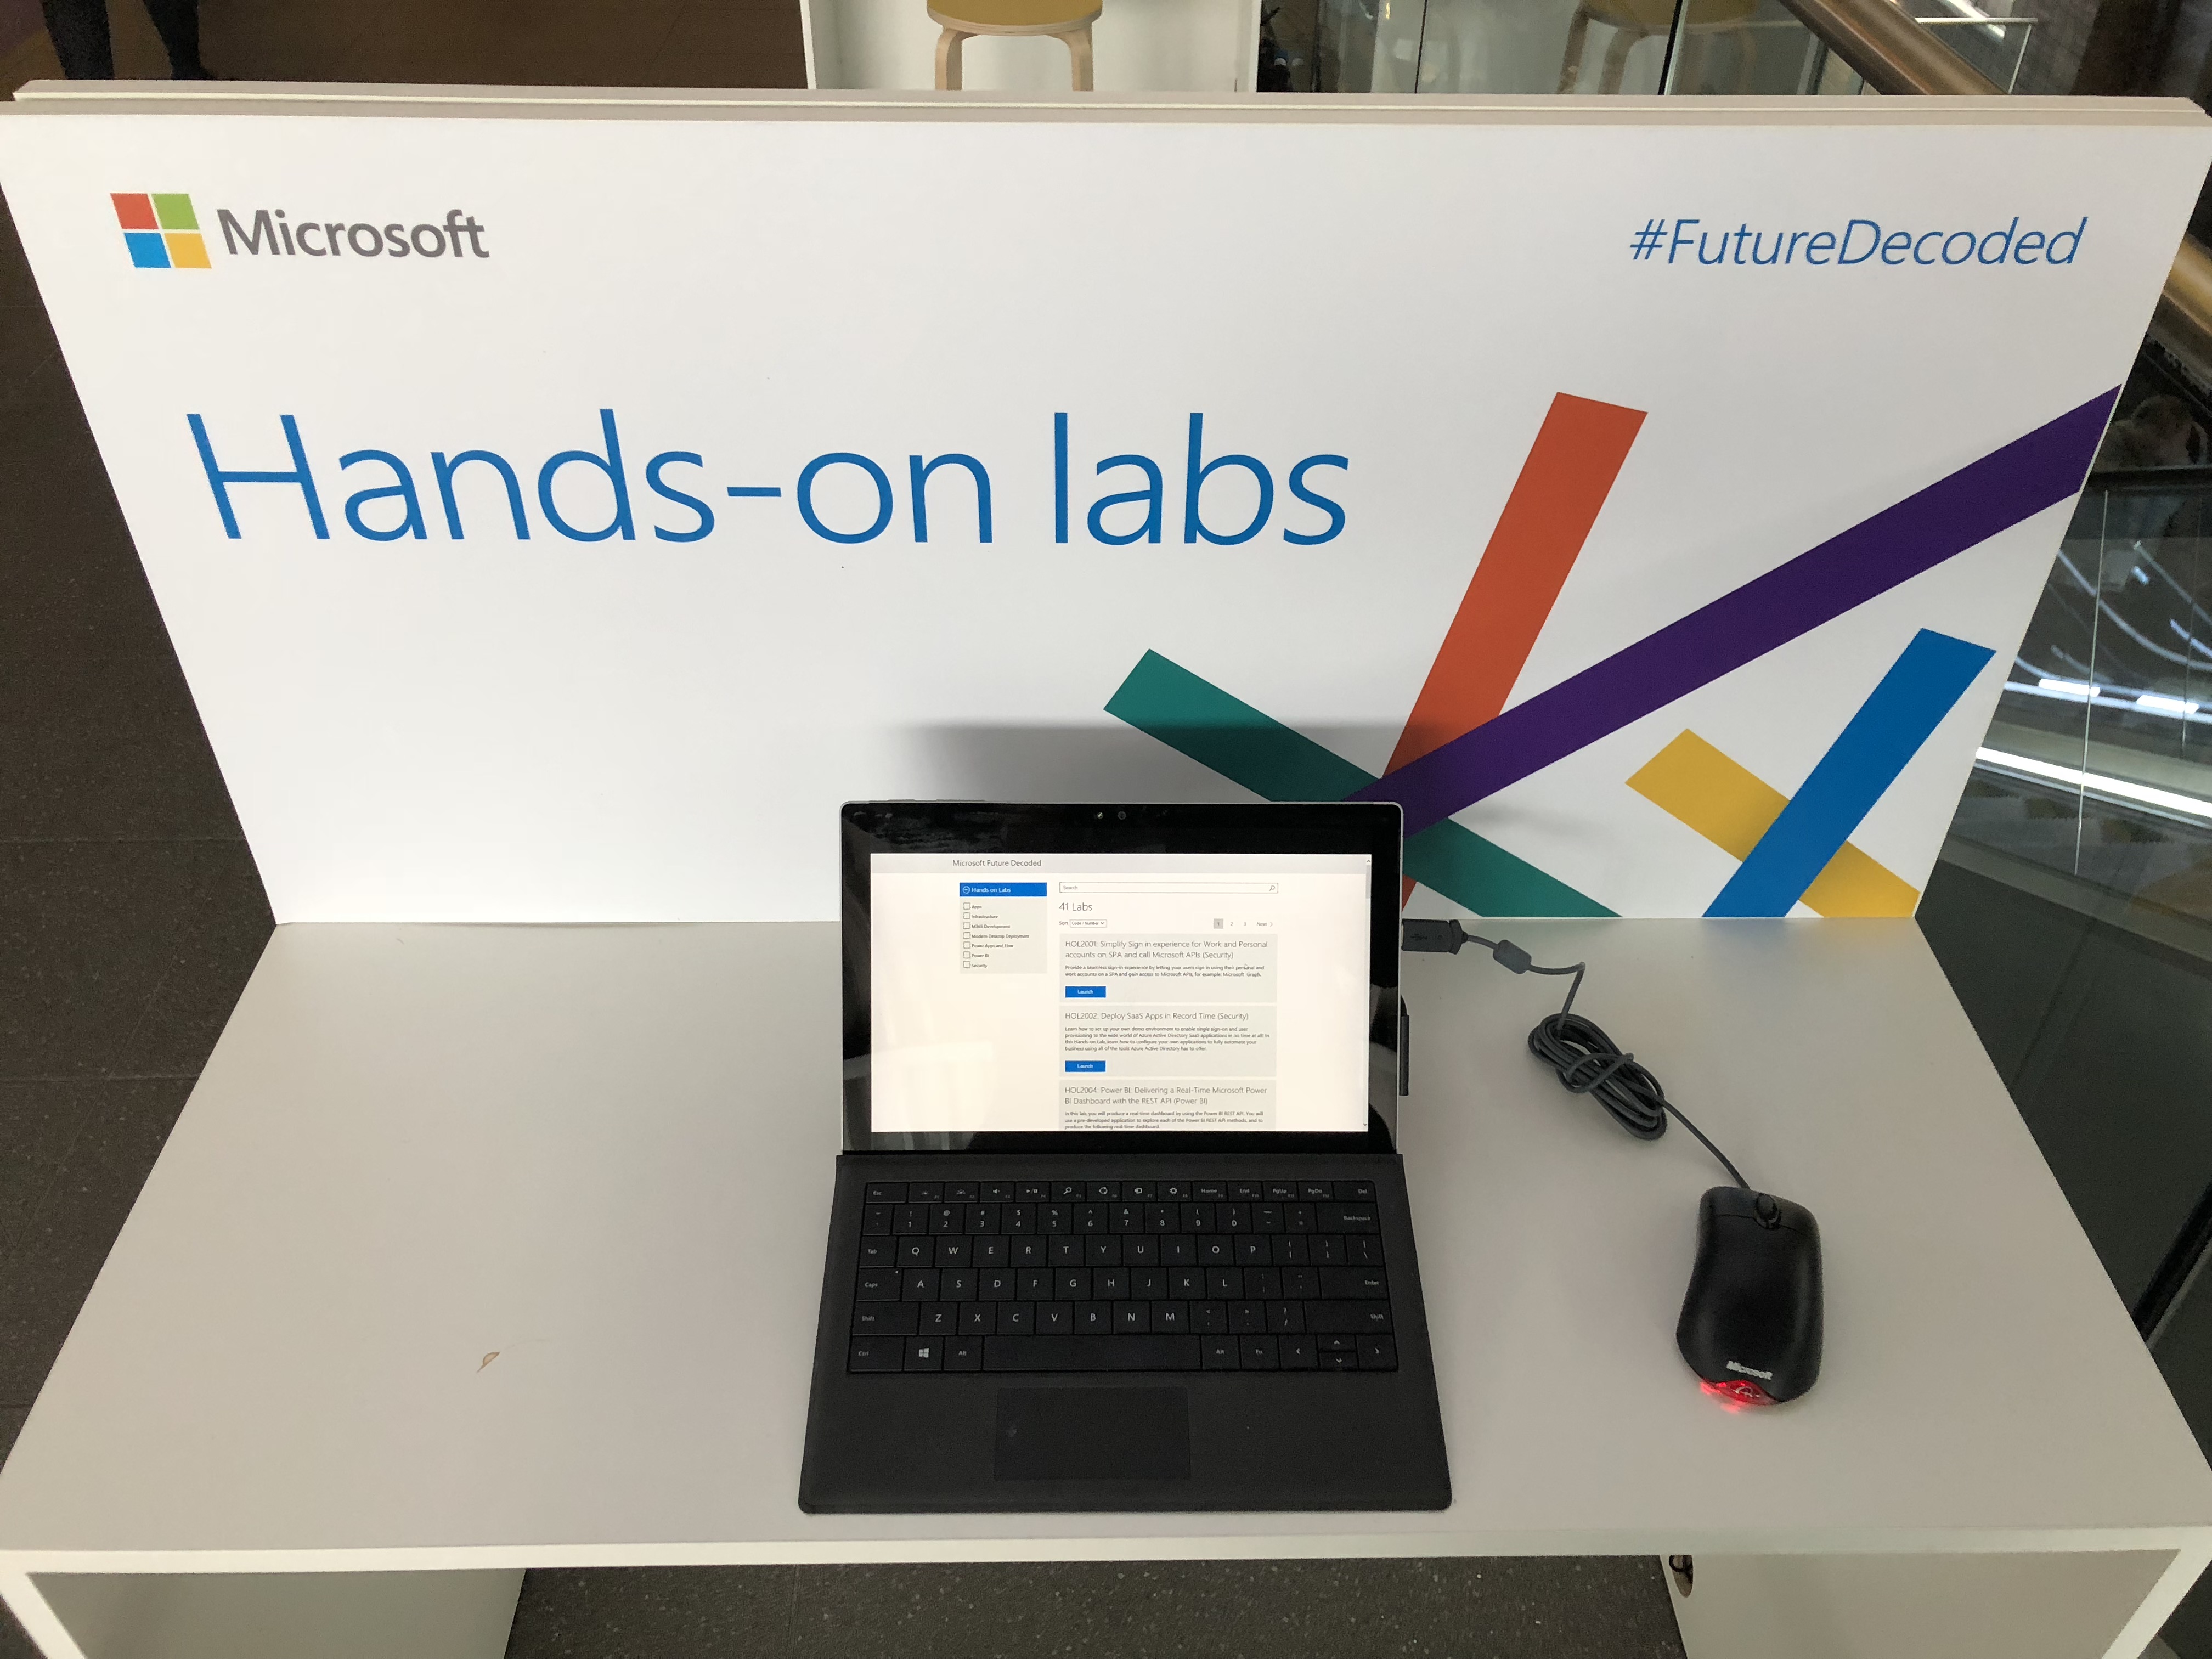 The Hands-on Labs gave visitors the chance to try out Microsoft products